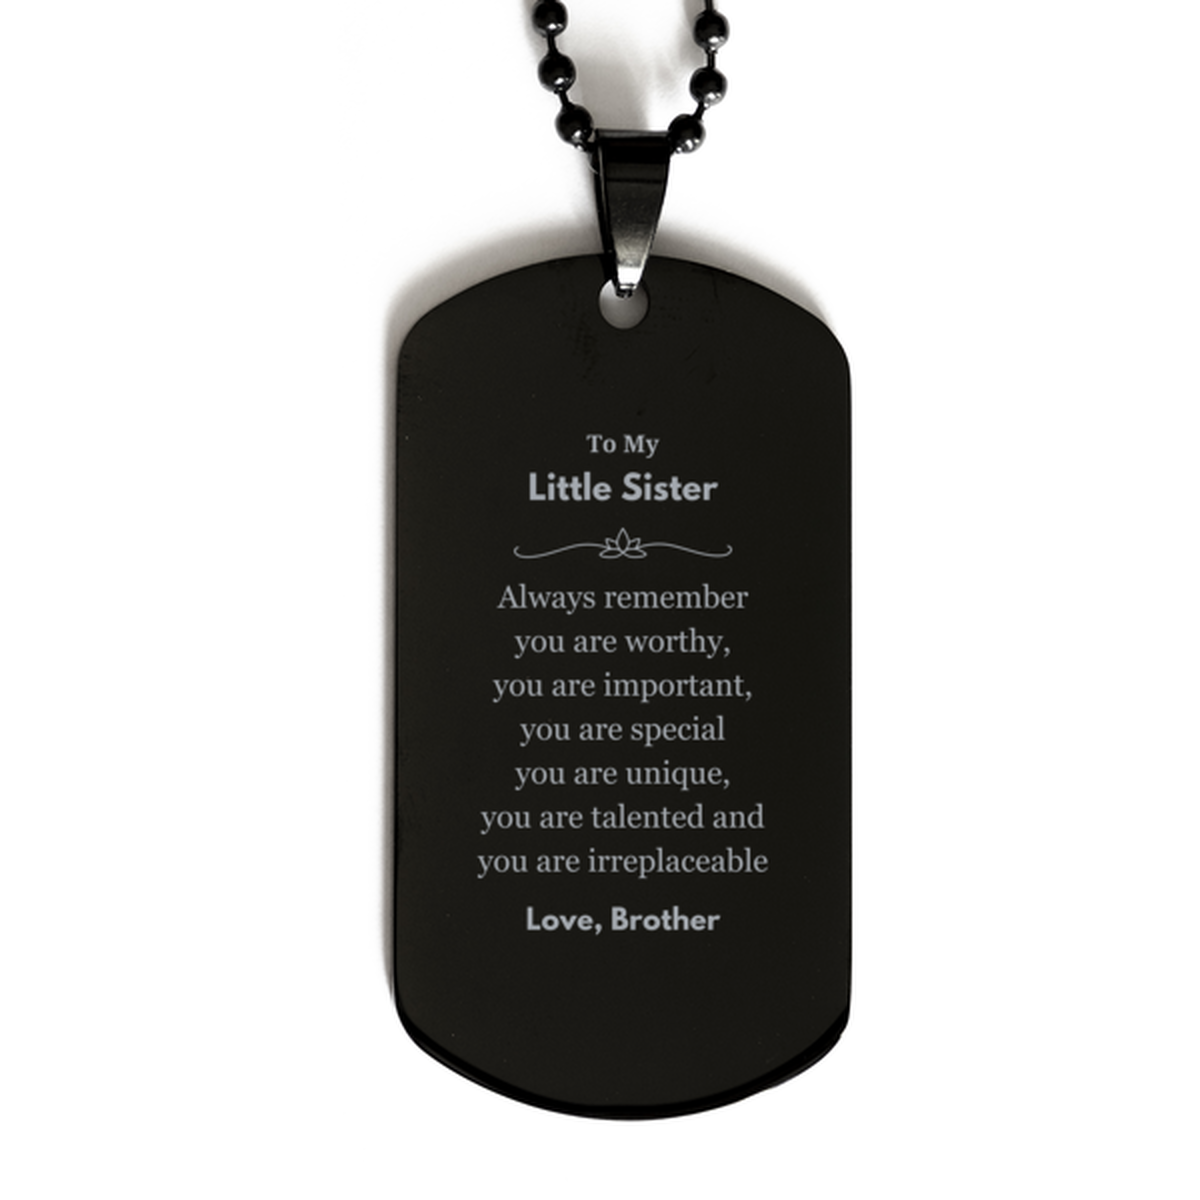 Little Sister Birthday Gifts from Brother, Inspirational Black Dog Tag for Little Sister Christmas Graduation Gifts for Little Sister Always remember you are worthy, you are important. Love, Brother